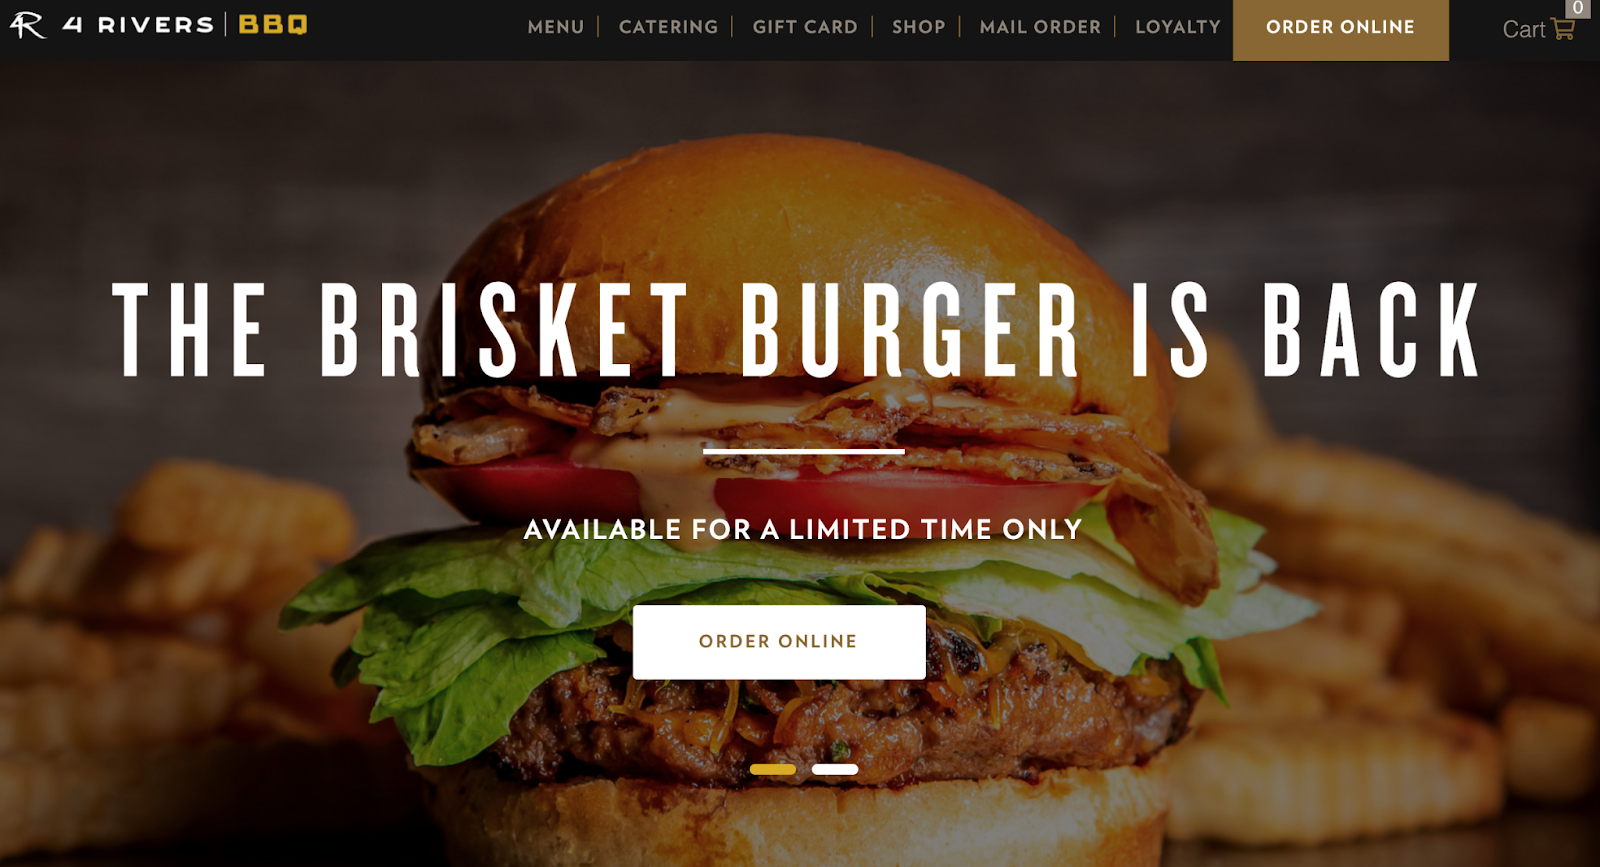 4 rivers smokehouse website homepage featured image with a cheese burger